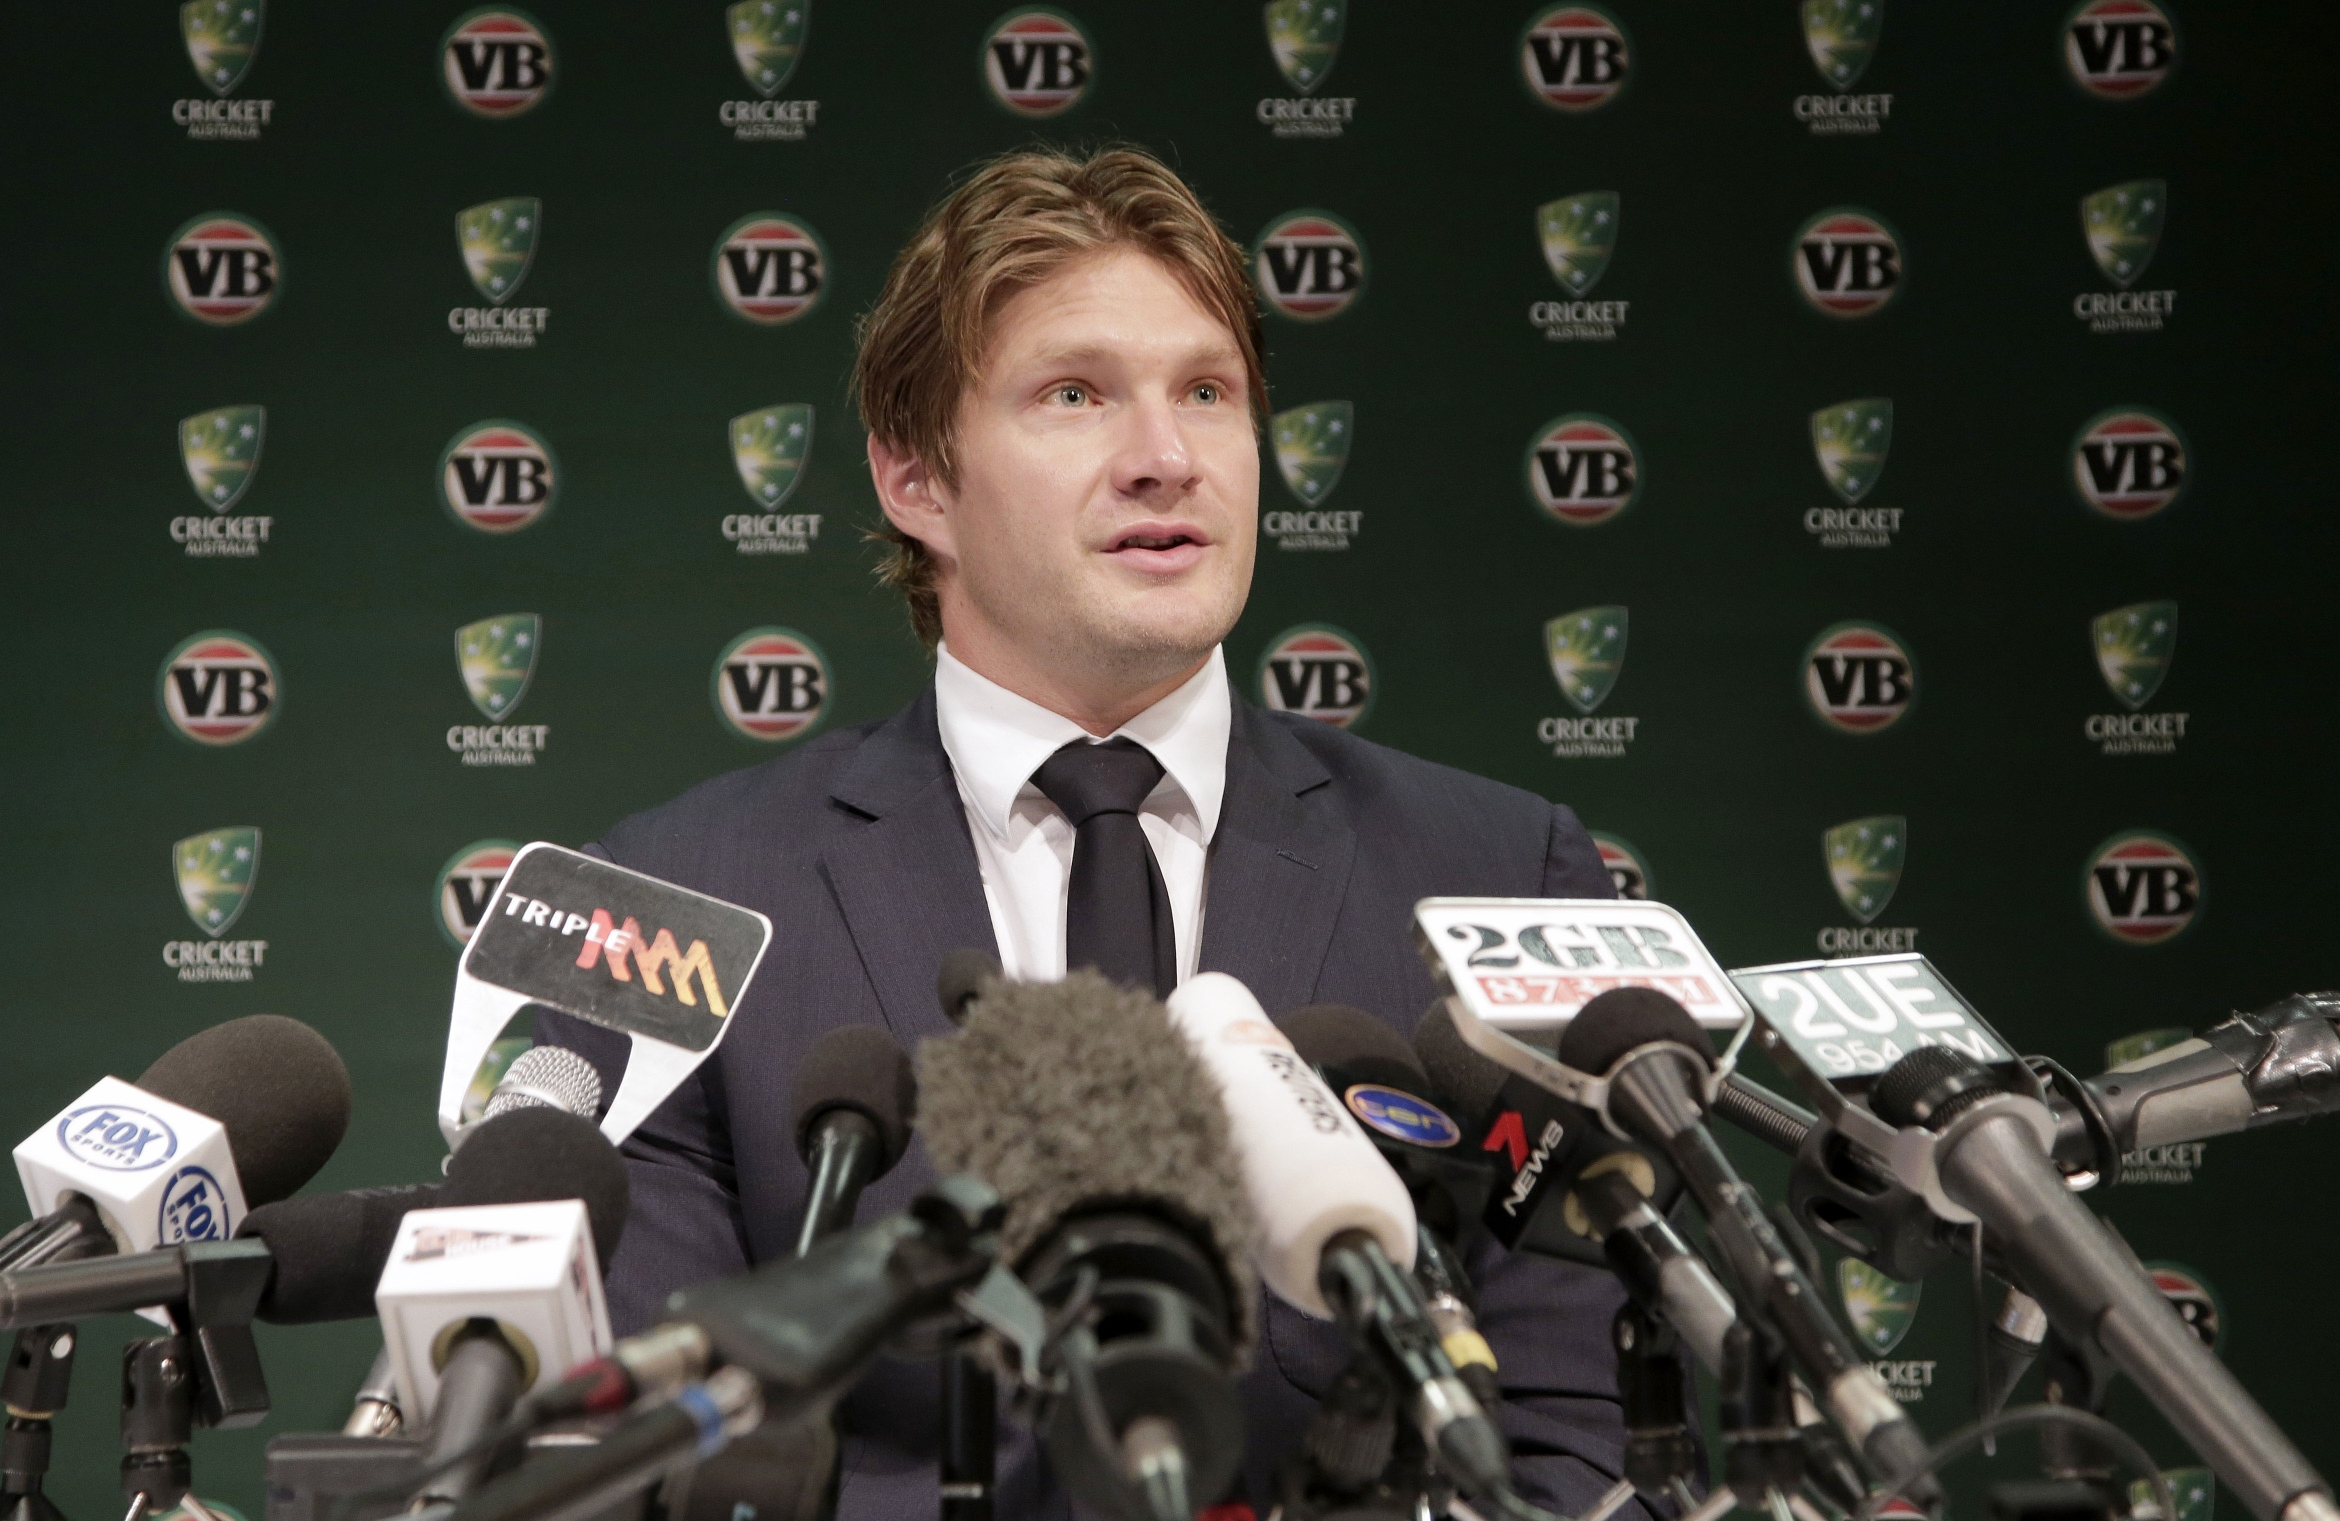 Shane Watson should be fit to play in the Ashes, Australia's coach said. Photo: AP